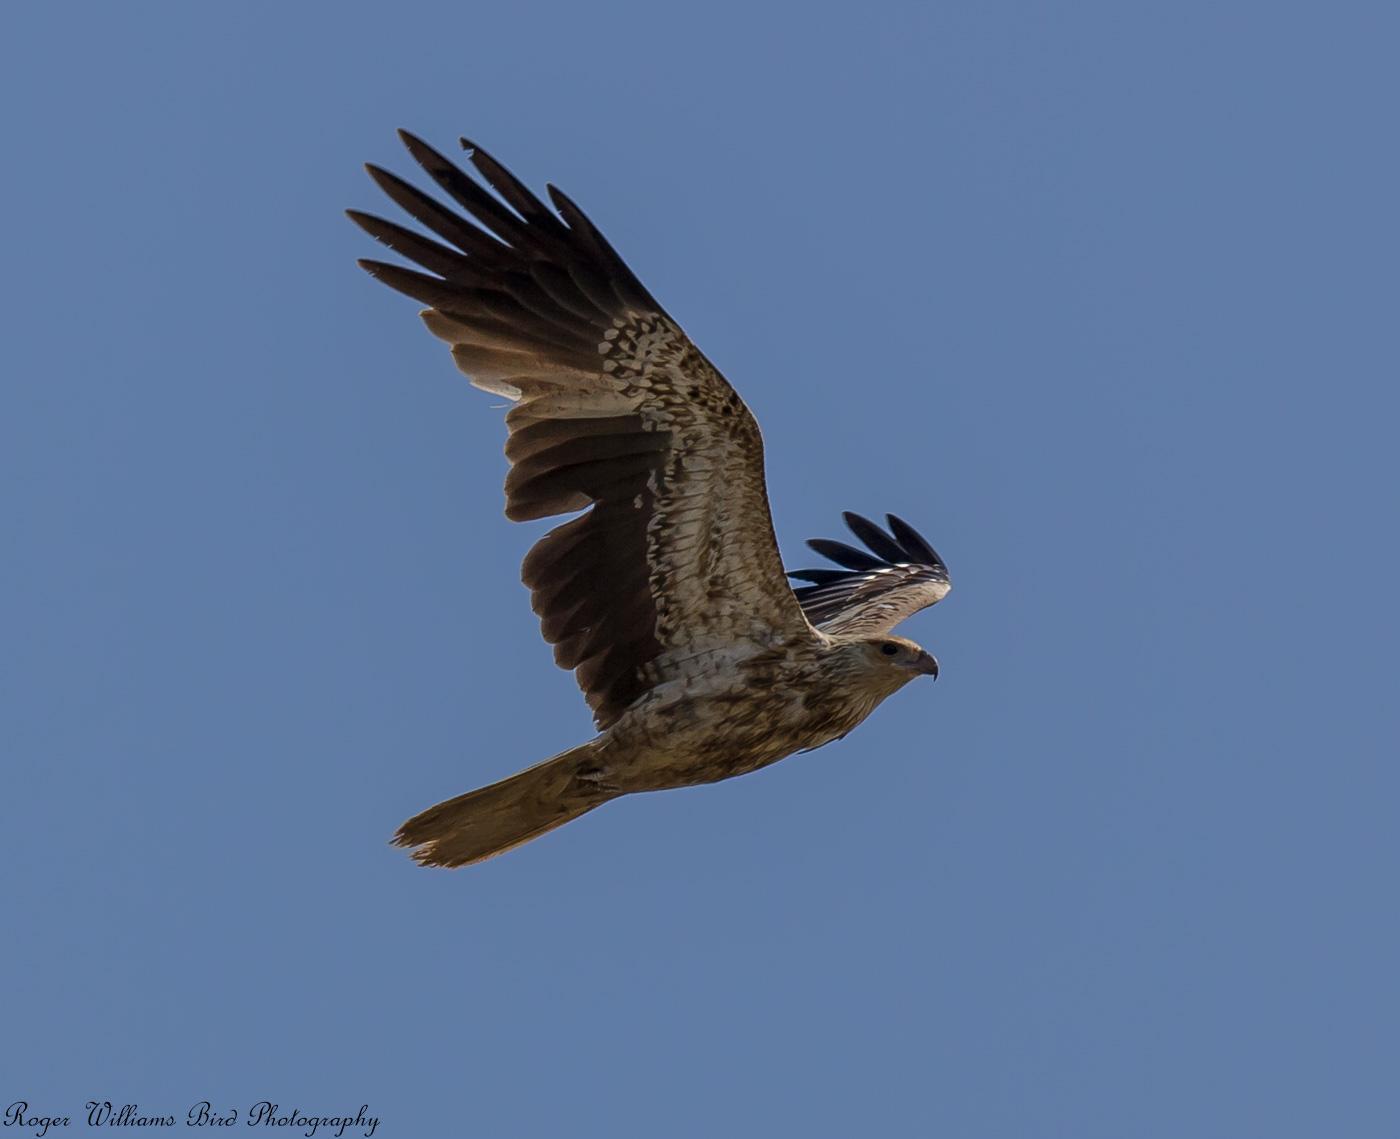 Whistling Kite Photo by Roger Williams